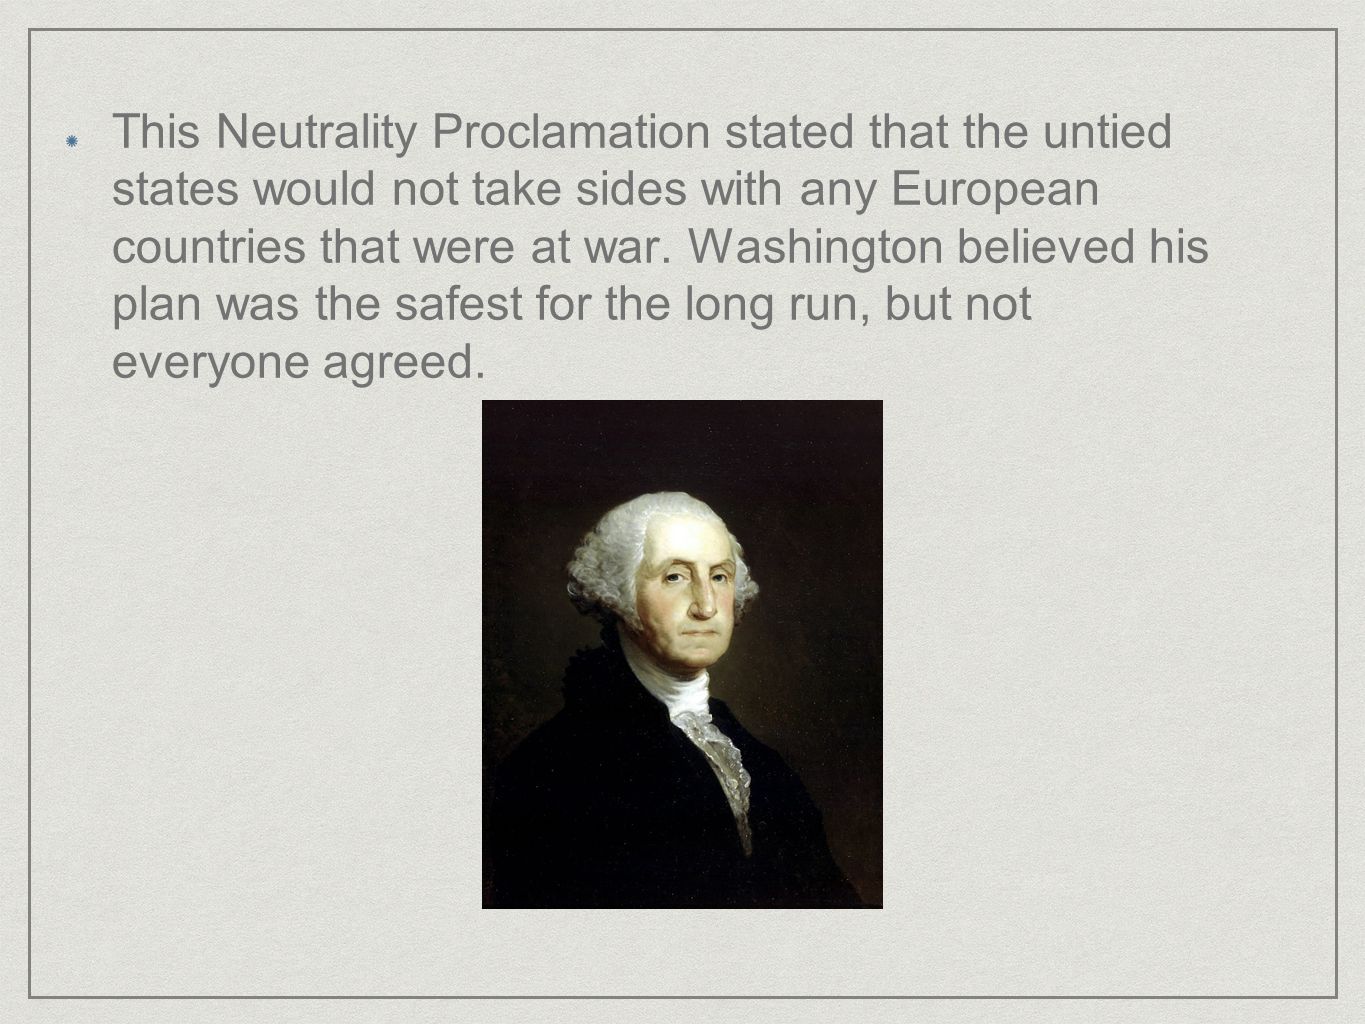 This Neutrality Proclamation stated that the untied states would not take sides with any European countries that were at war.